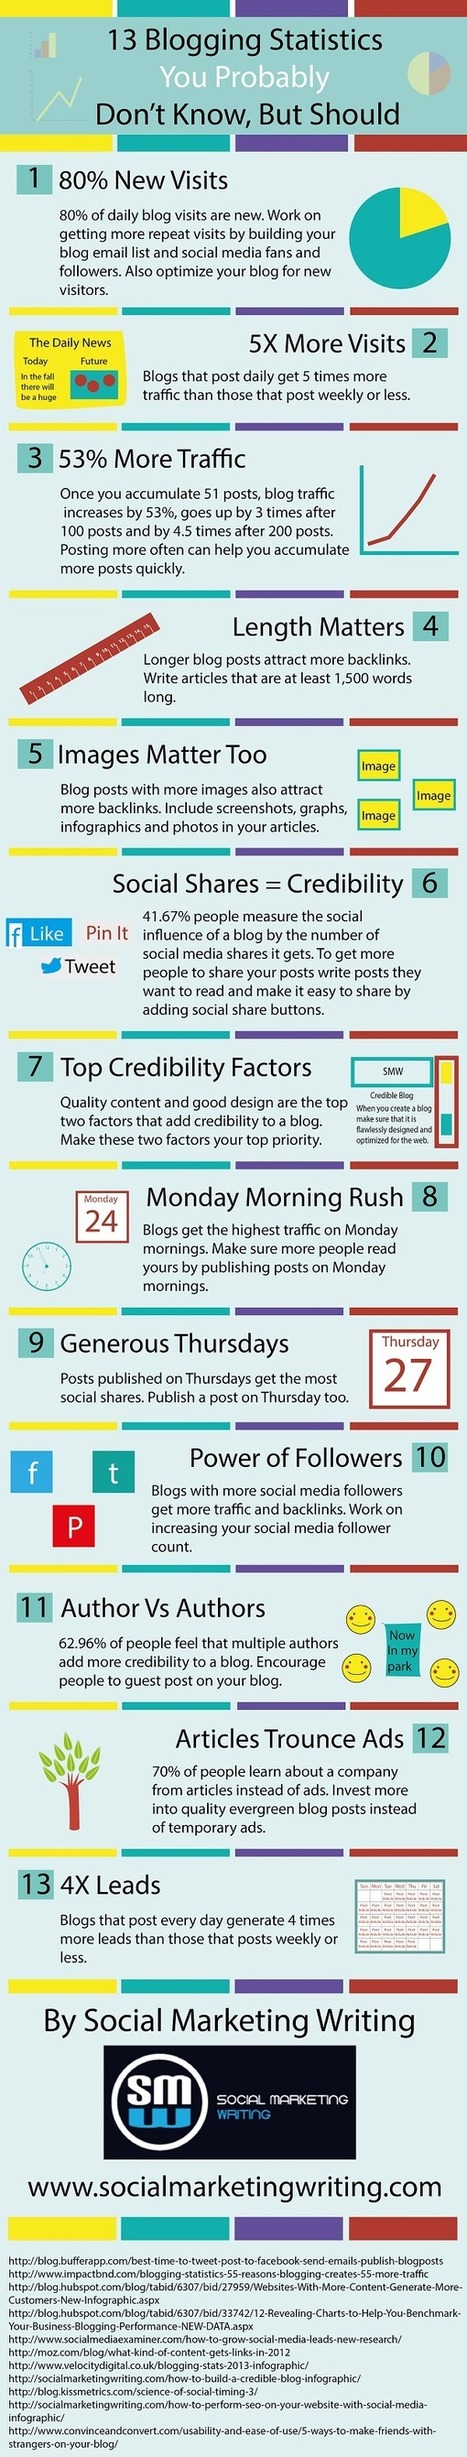 13 Blogging Statistics You Probably Don’t Know, But Should [Infographic] | digital marketing strategy | Scoop.it